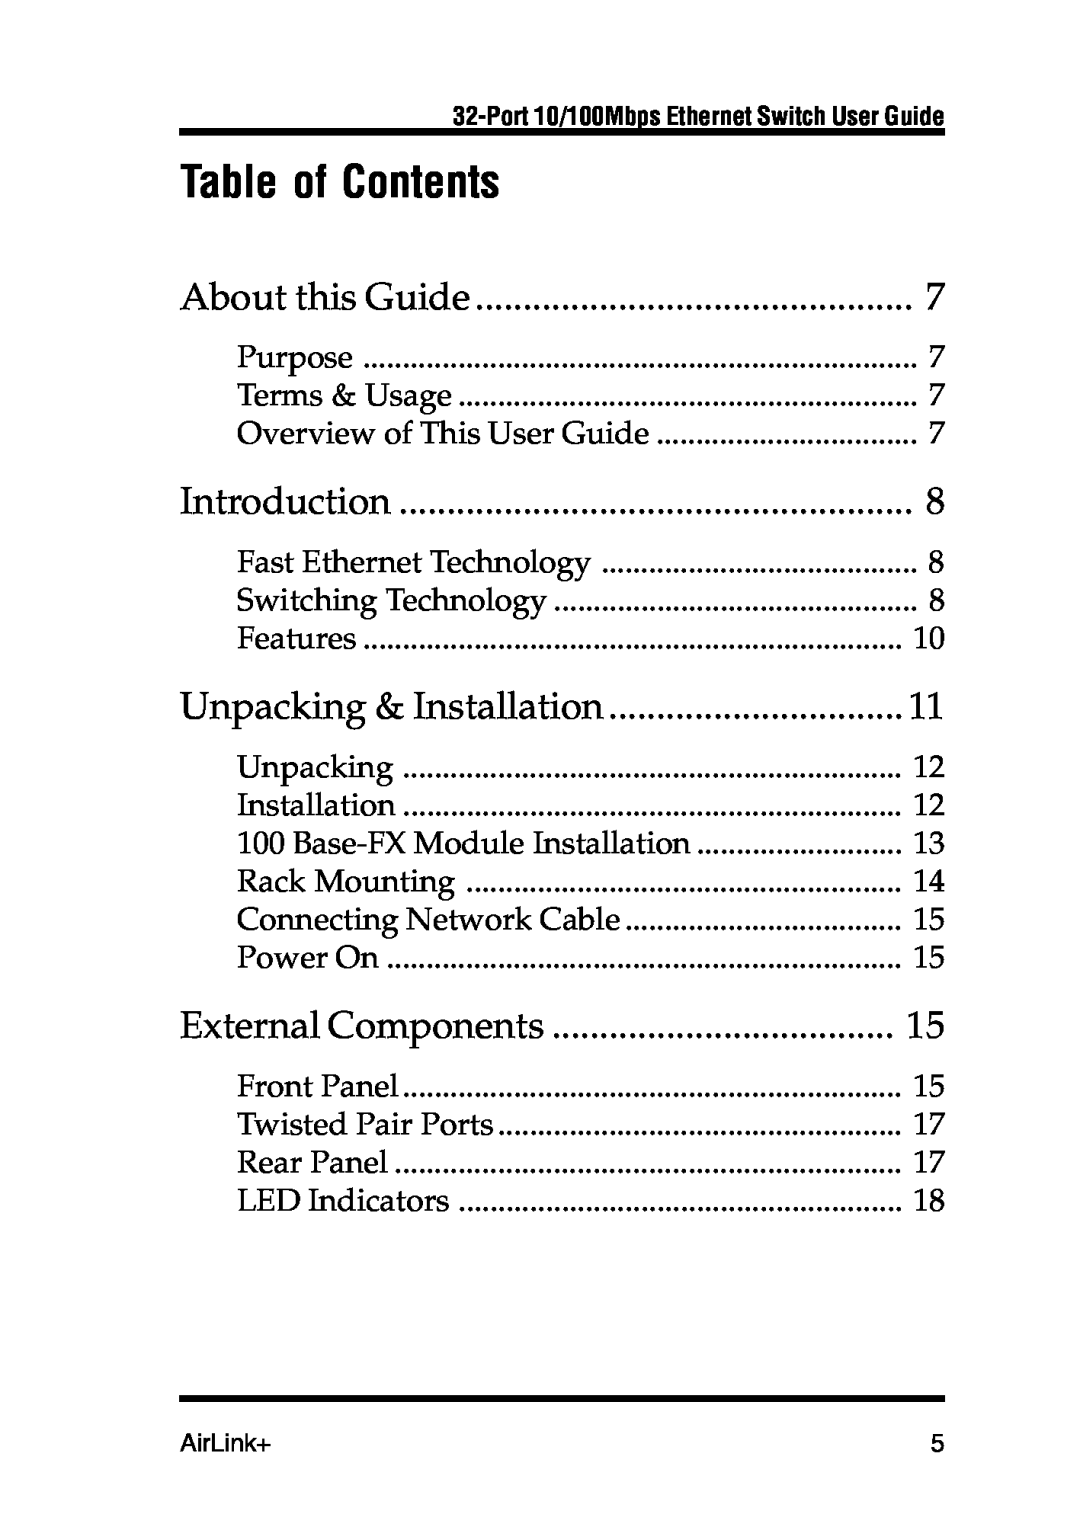 Airlink UG-ASW232-1103 Table of Contents, About this Guide, Introduction, Unpacking & Installation, External Components 